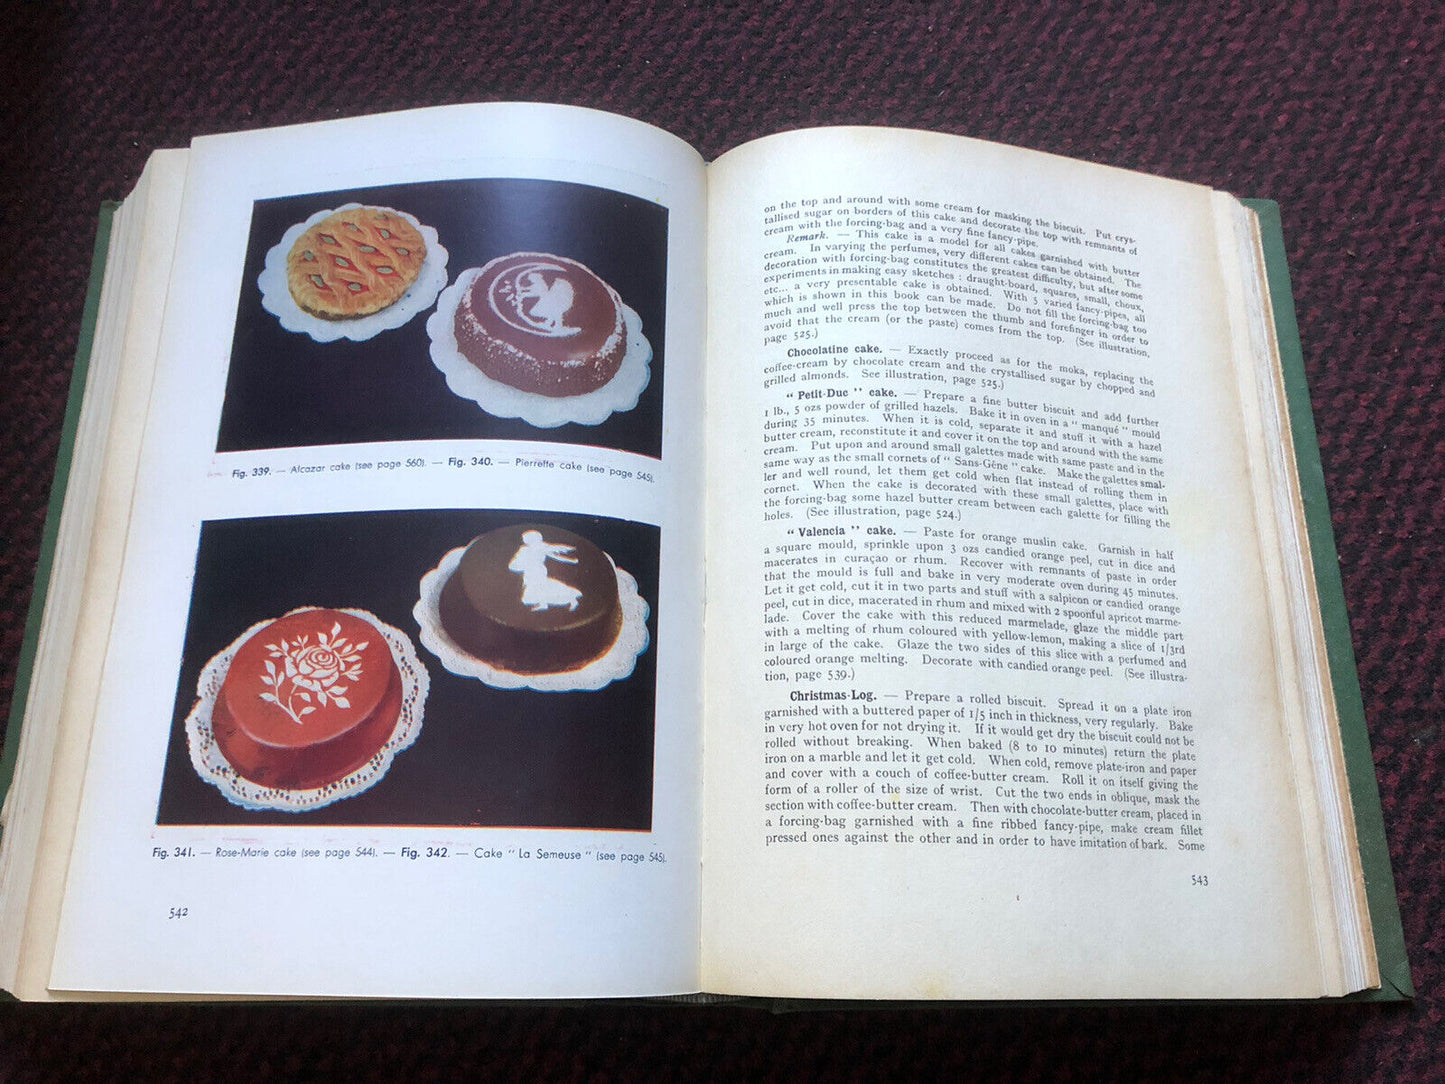 1937 Modern Culinary Art French and Foreign Cookery : Henri-Paul Pellaprat